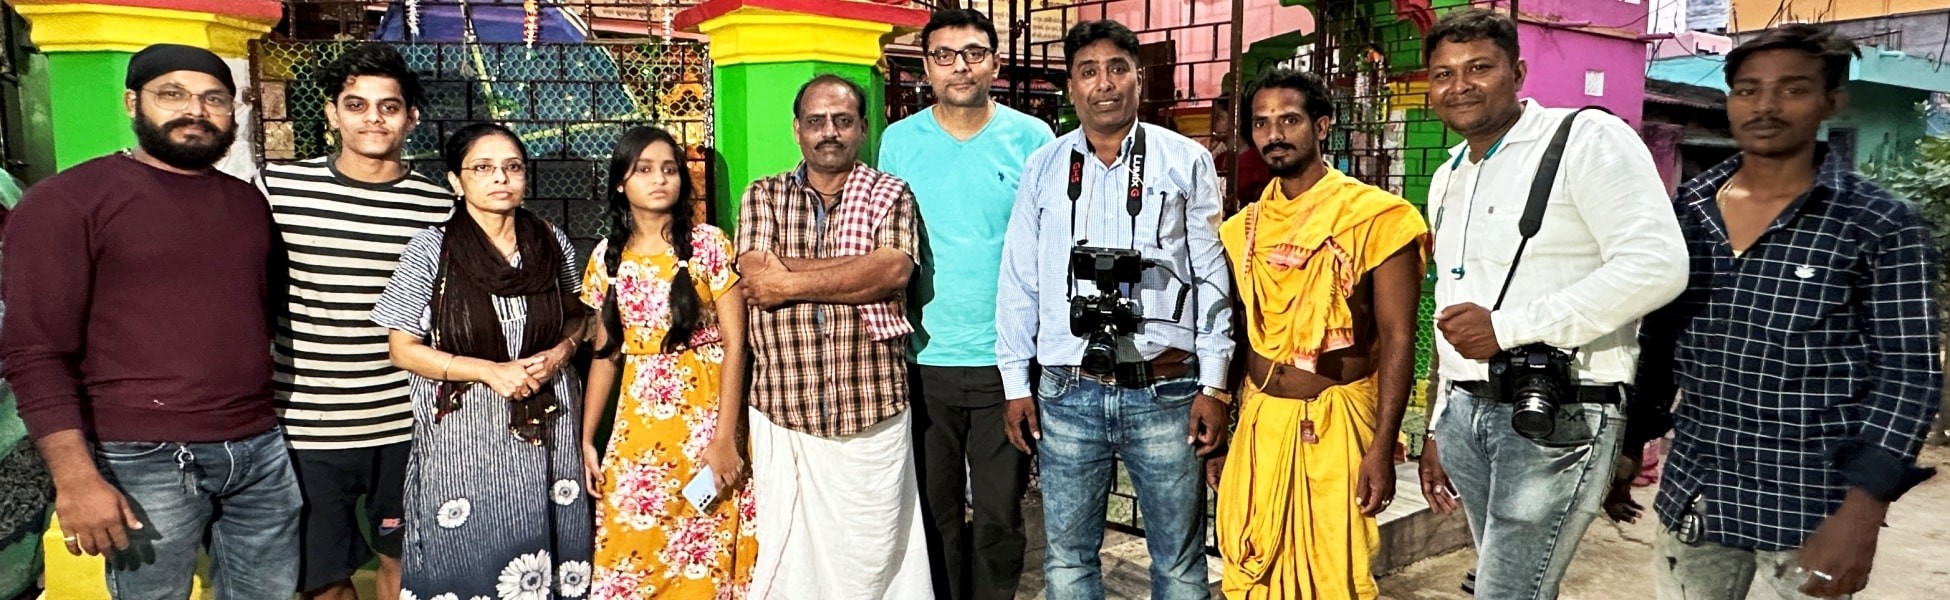 film production house in Dungarpur, video production house in Dungarpur, tv production house in Dungarpur, production house in Dungarpur, film production company in Dungarpur, video production company in Dungarpur, tv production company in Dungarpur, production company in Dungarpur